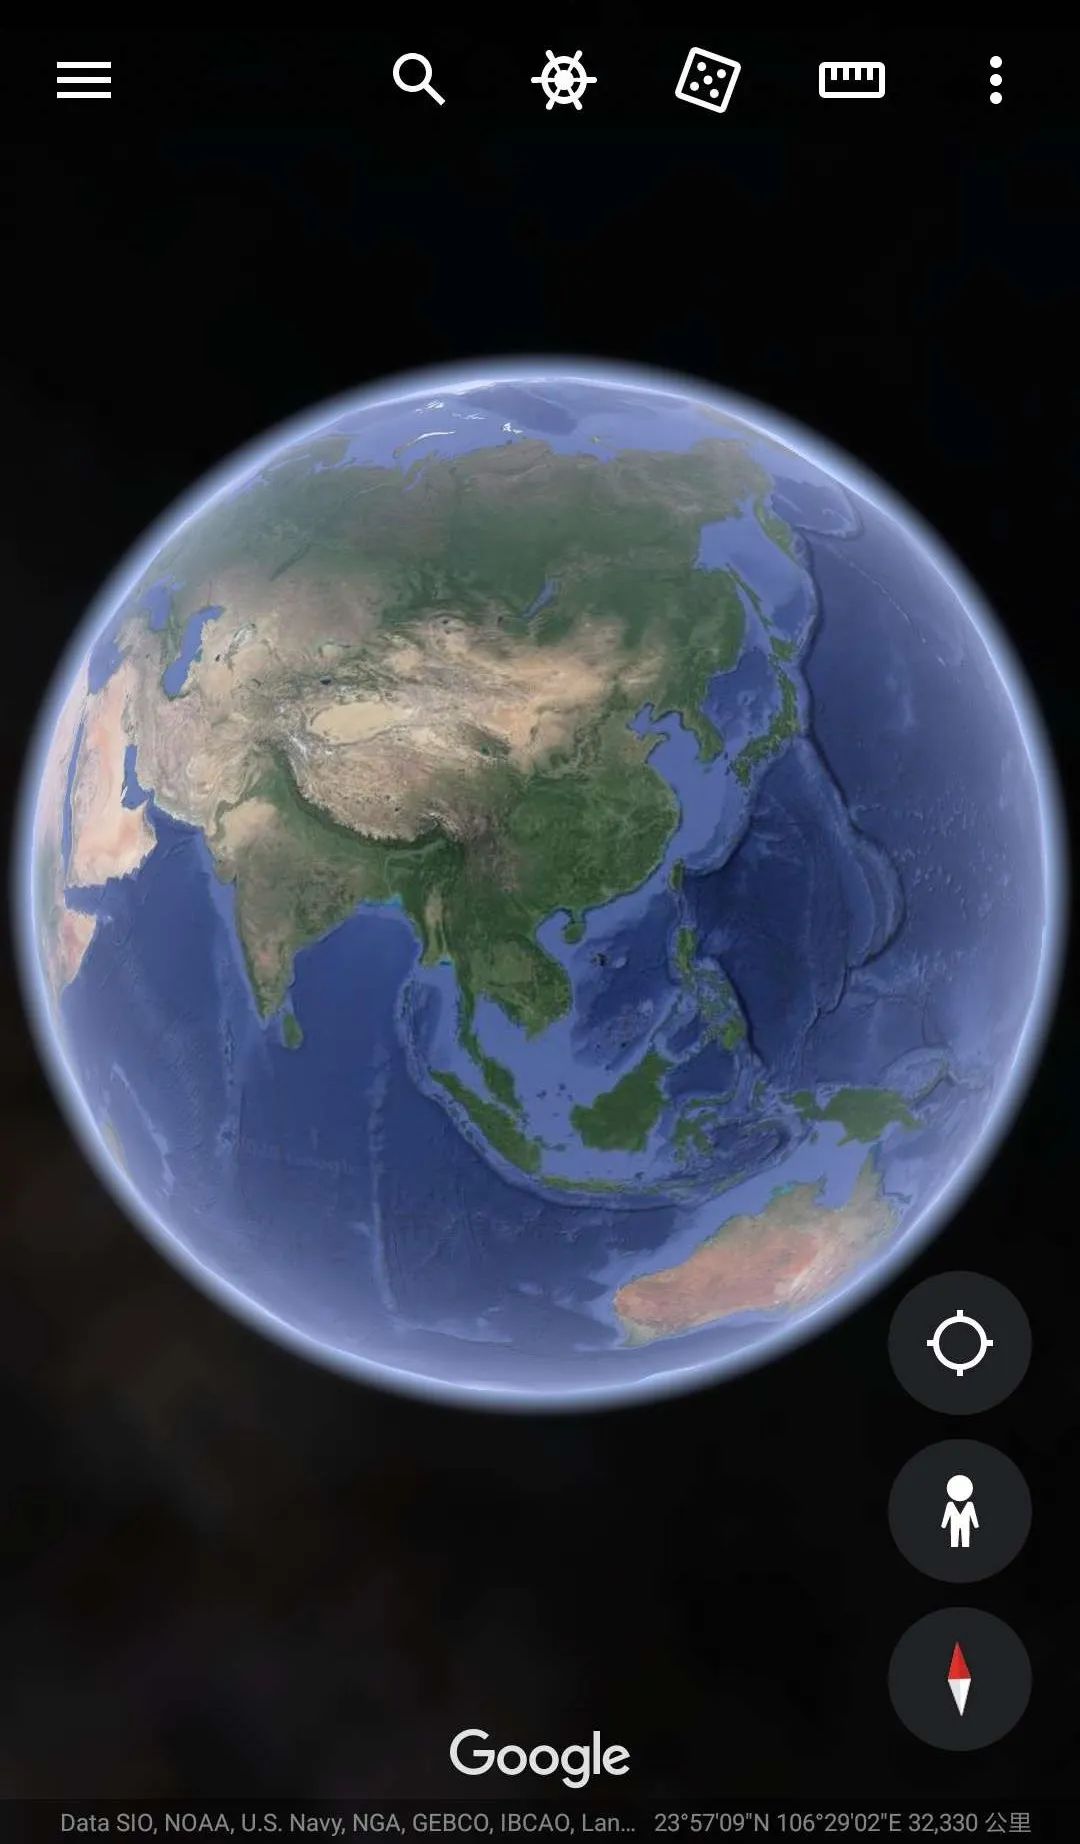  Google Maps Google Maps: a faithful partner of travel and exploration, taking you to the unknown world